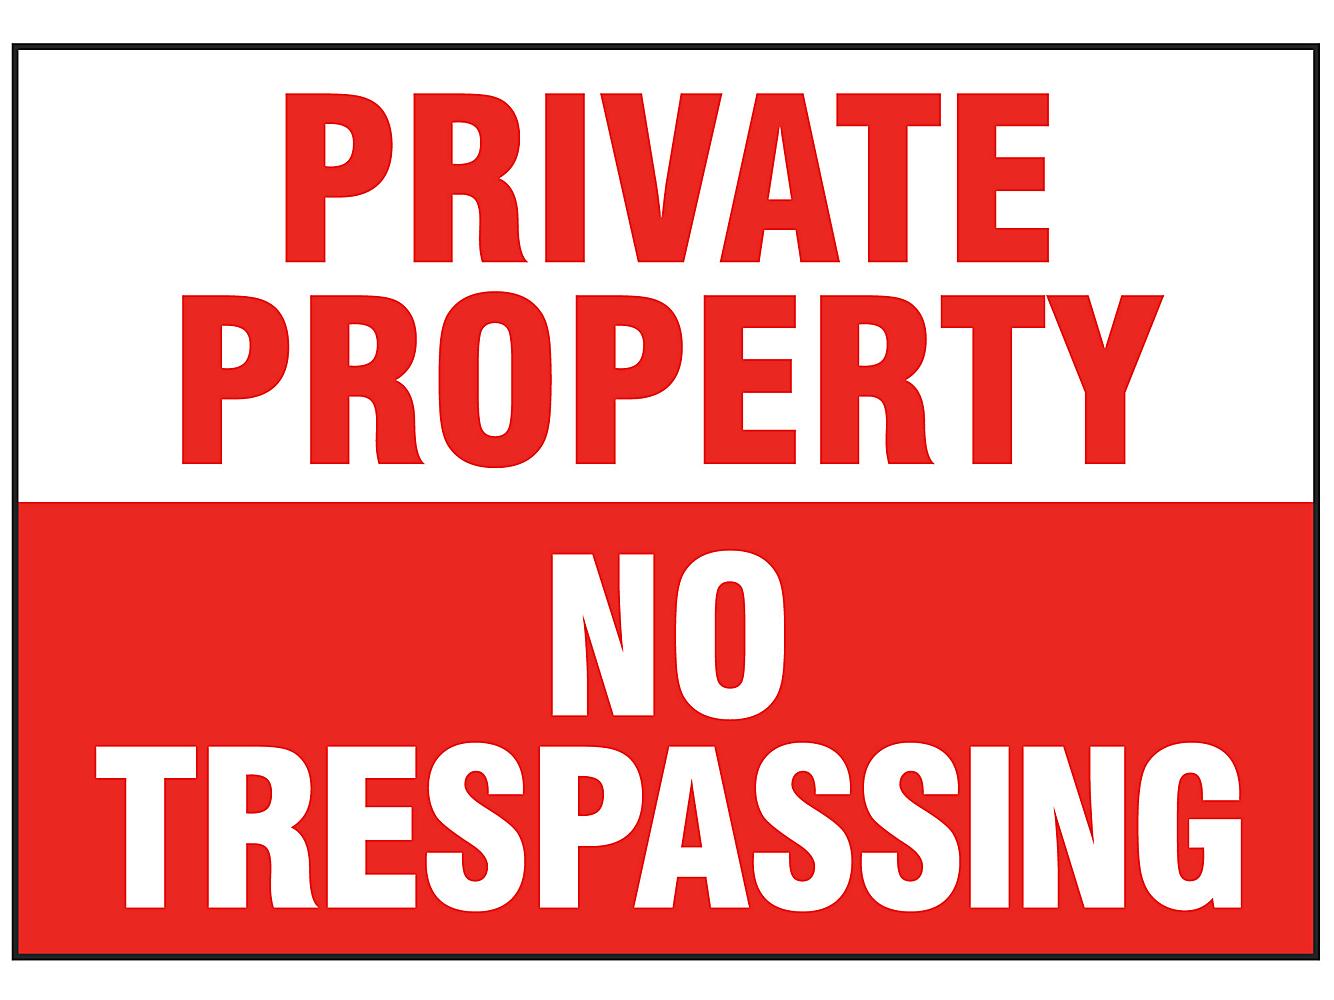 No Trespassing Sign, Private Property Sign